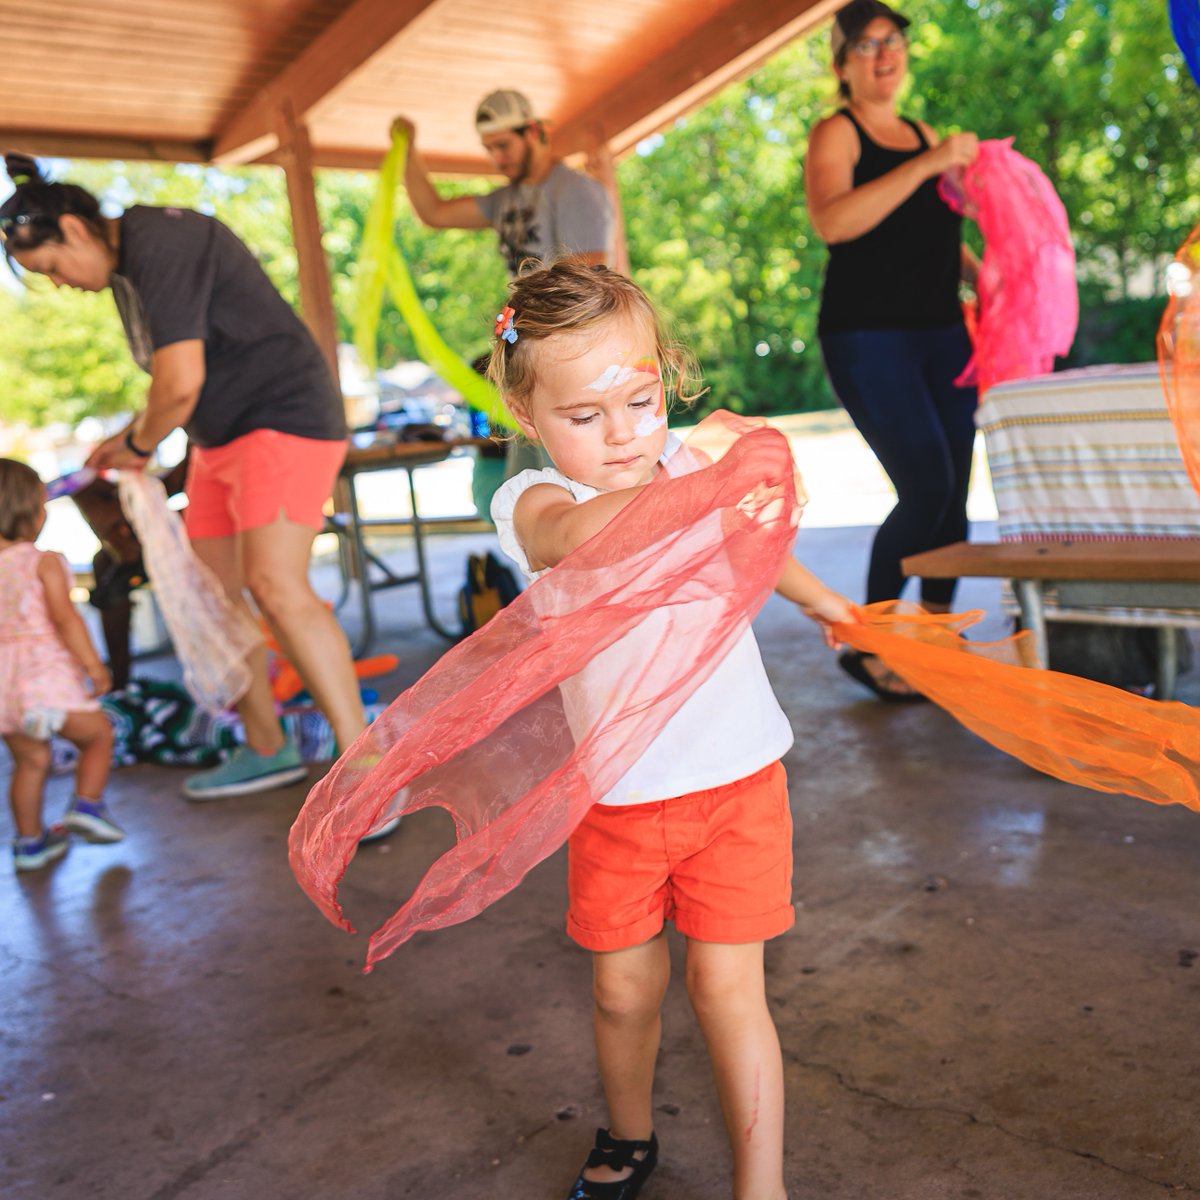 Join us at the Boggy Creek Greenbelt for a morning of fun. @CreativeATX will lead their Music & Movement class, @KAB_Austin is bringing their vermicompost table, & @texasbookfest author Anne Wynter is reading her two recently published books! Learn more: bit.ly/4a7vPhg